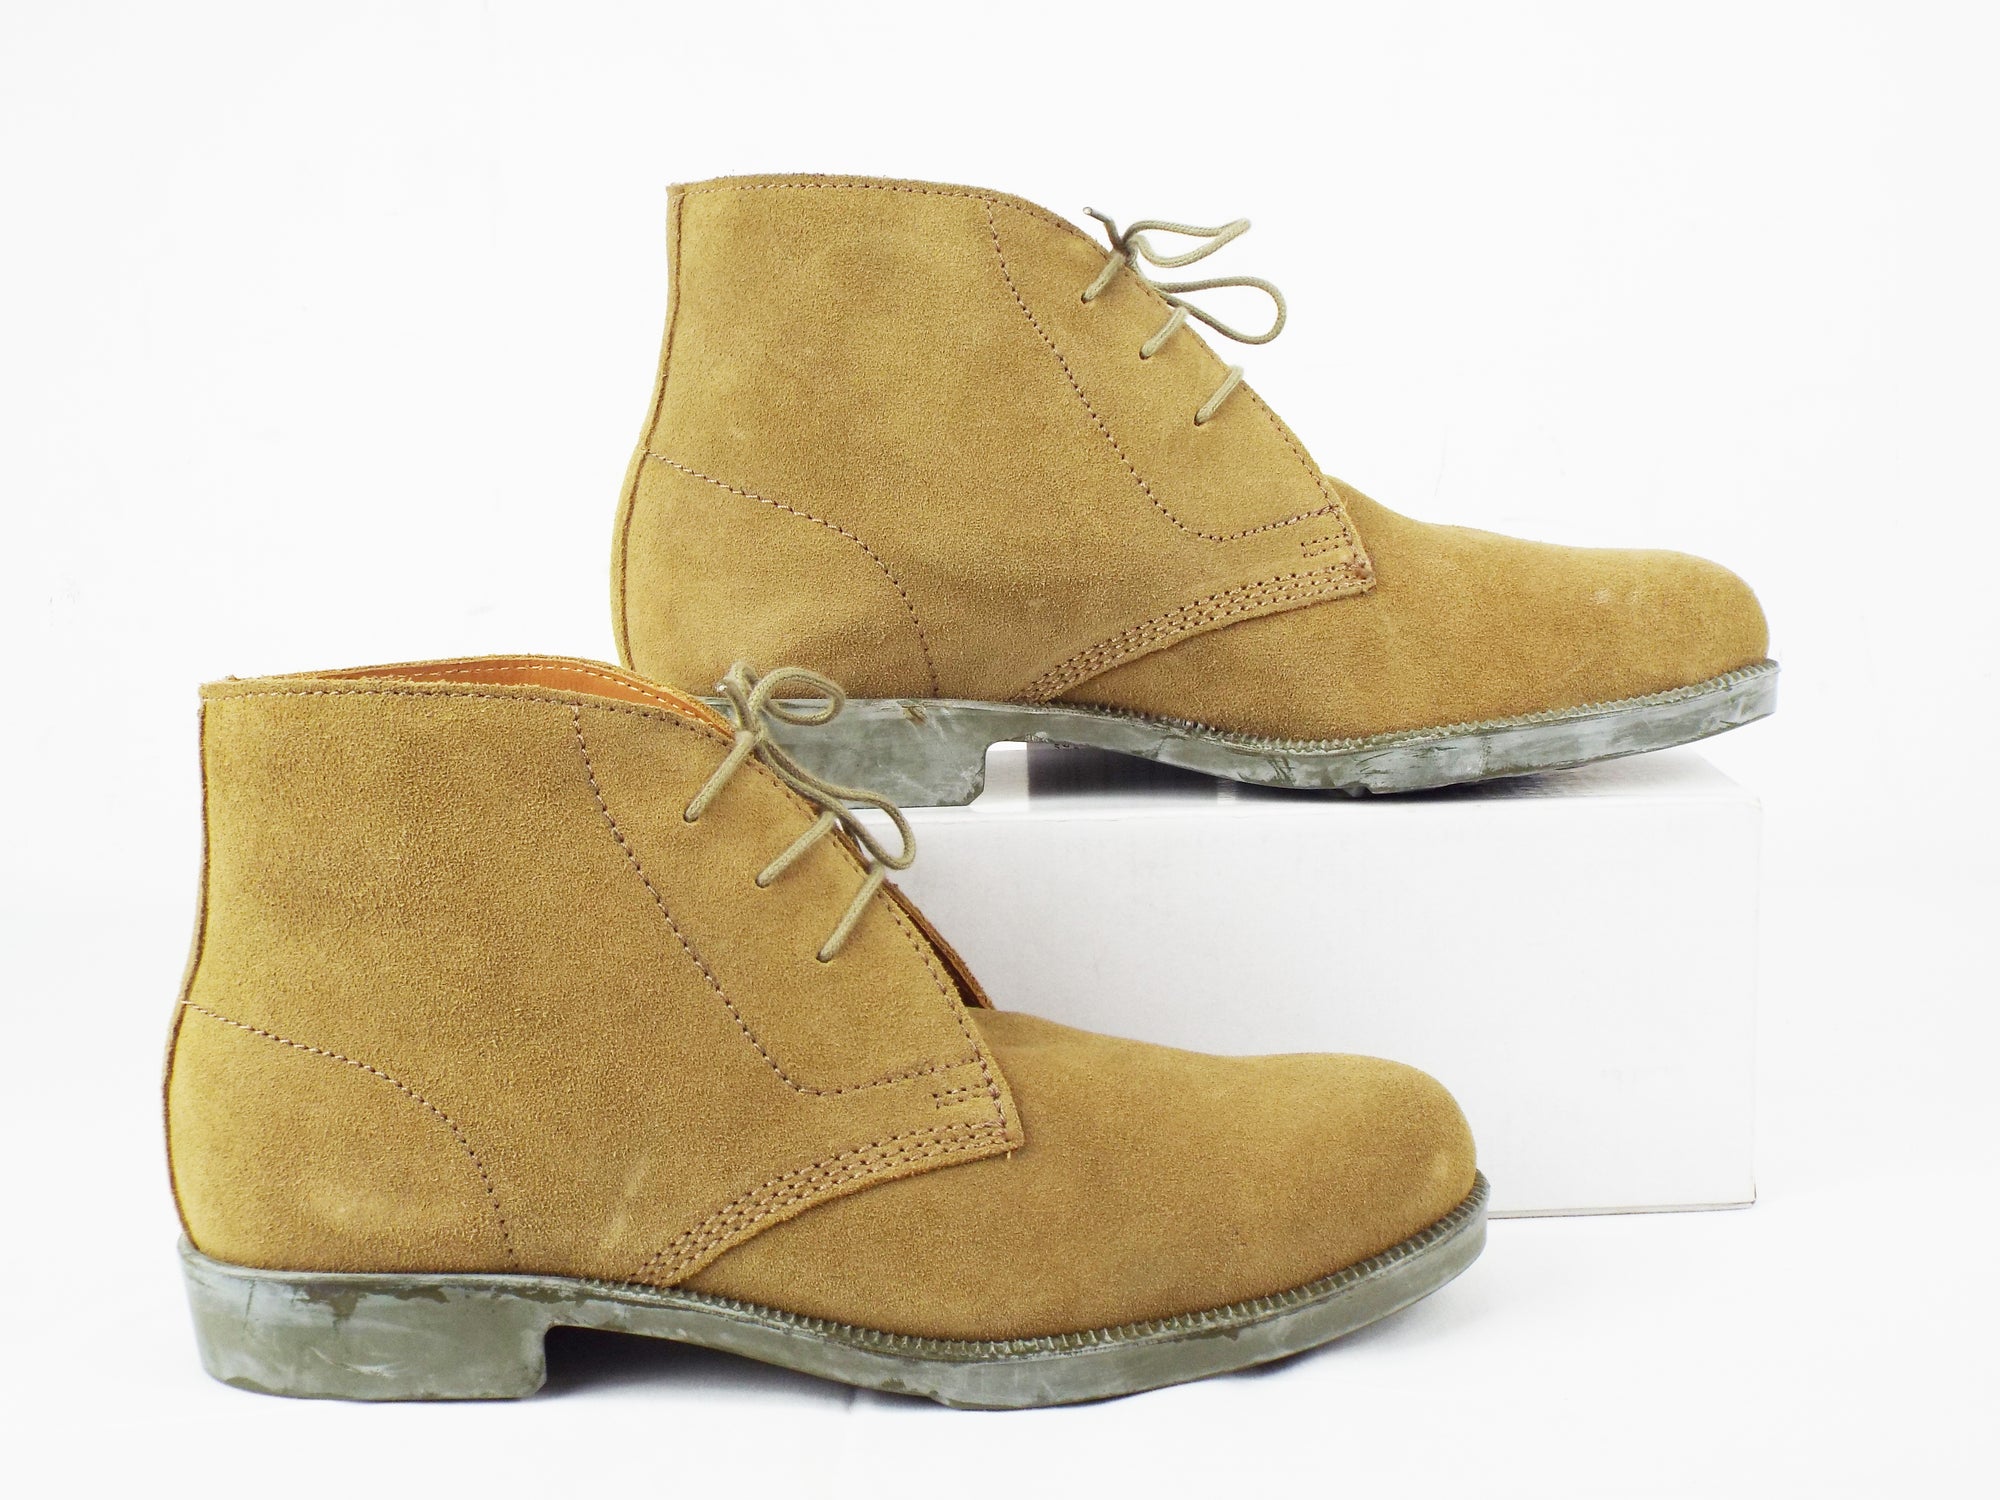 British Army - Suede Desert Ankle Boots - Monkey Boots - Unissued